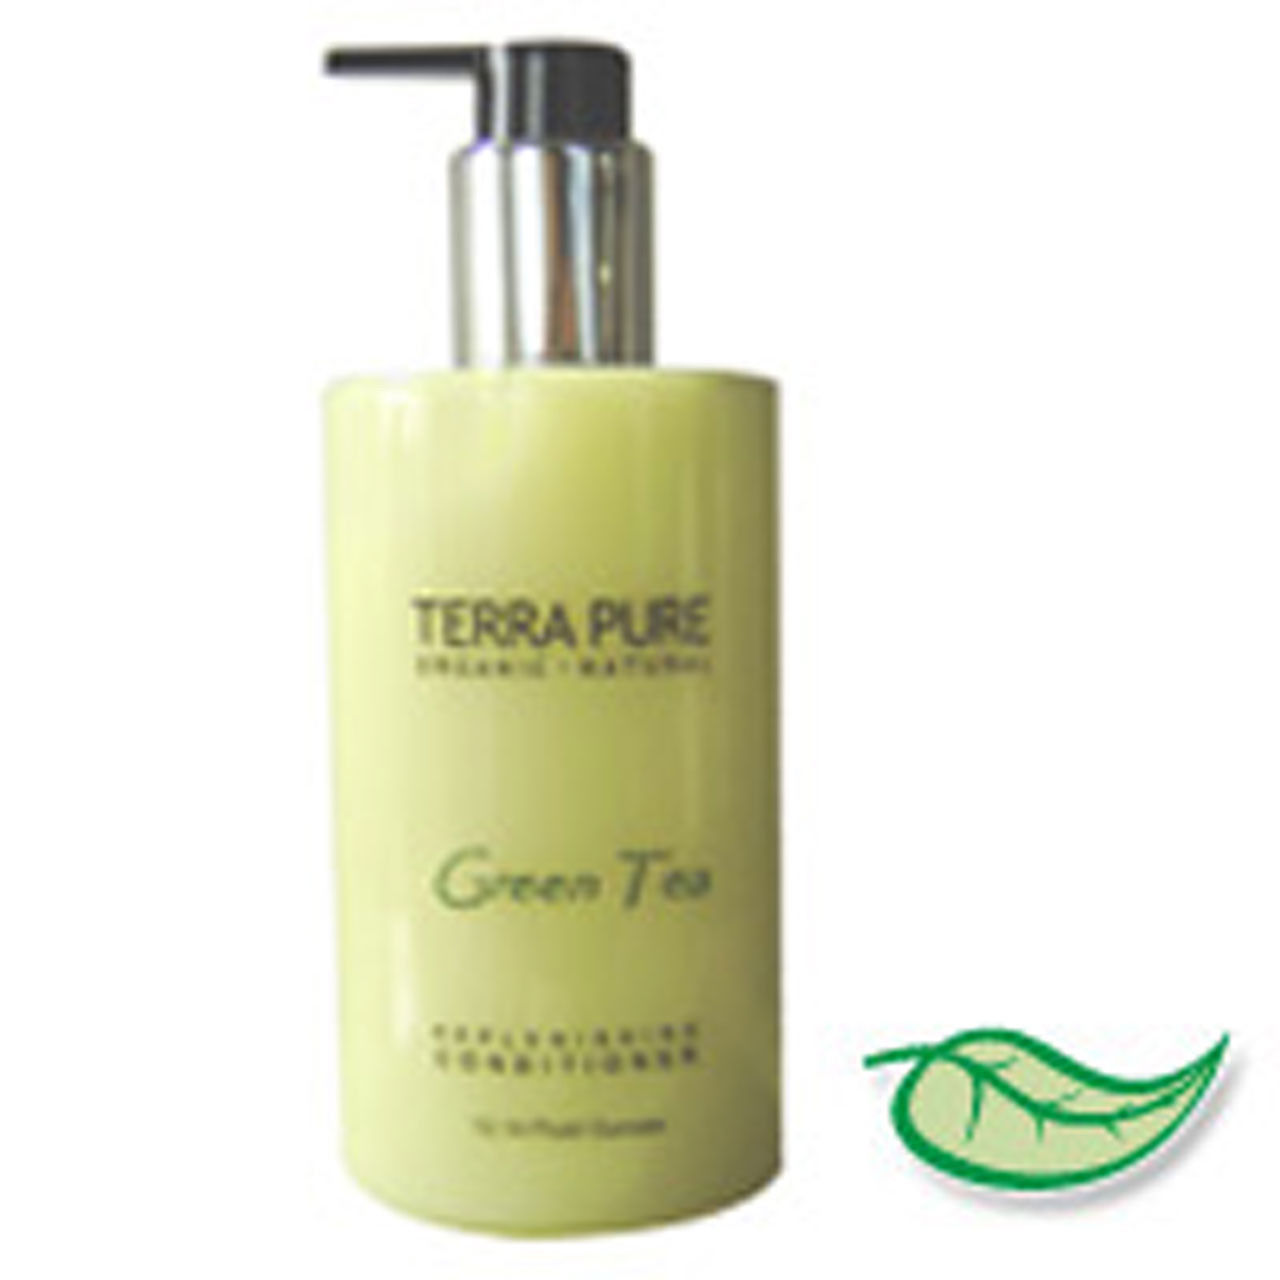 Terra Pure Green Tea Organic Hair Conditioner Questions & Answers